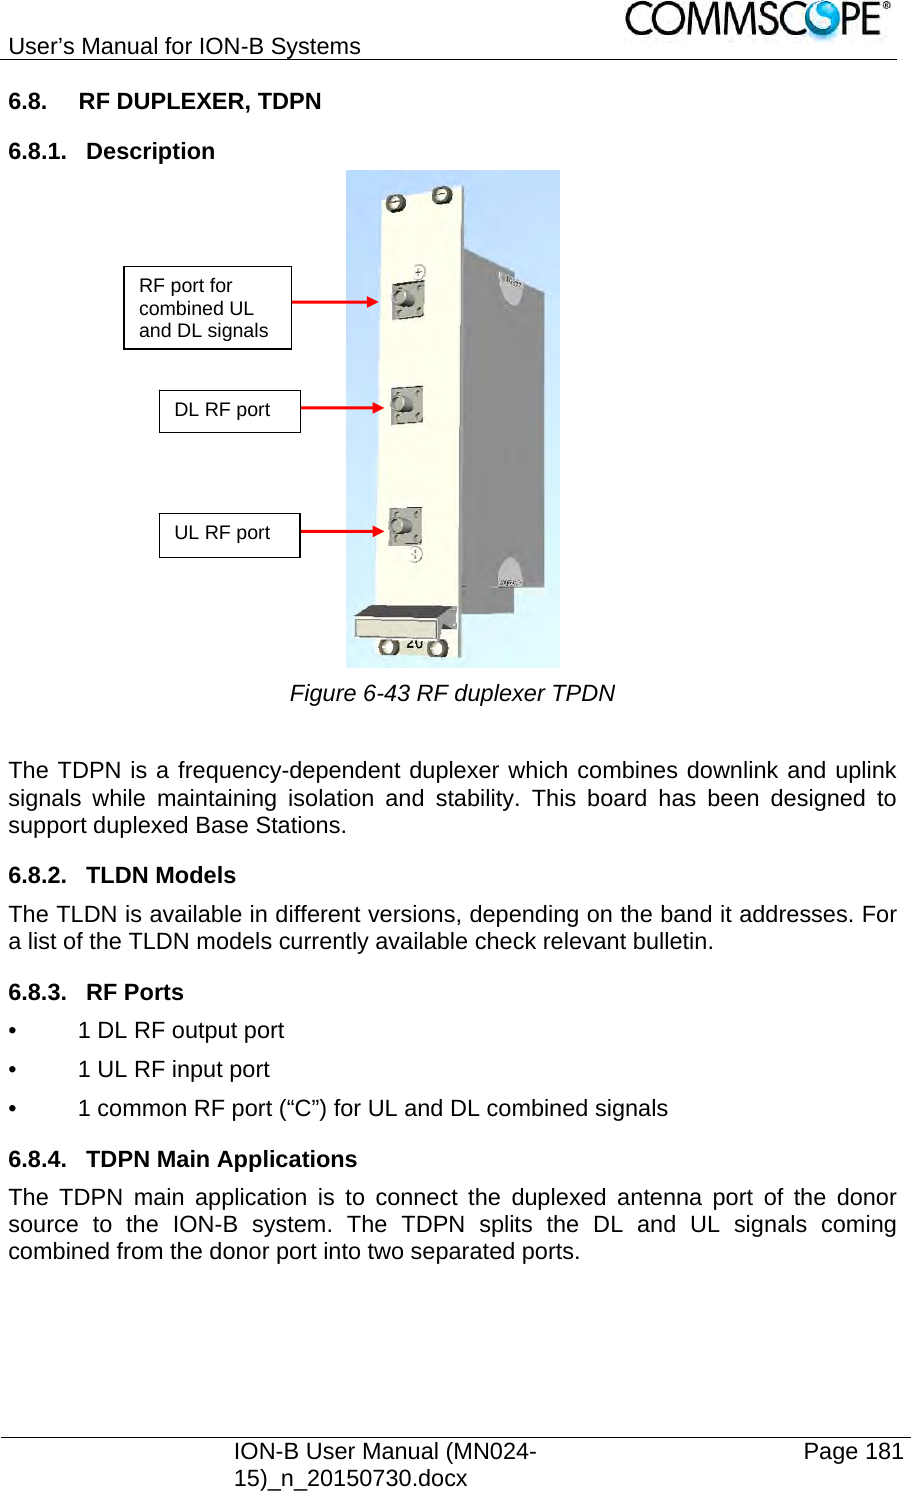 User’s Manual for ION-B Systems    ION-B User Manual (MN024-15)_n_20150730.docx  Page 181 6.8.  RF DUPLEXER, TDPN 6.8.1. Description  Figure 6-43 RF duplexer TPDN  The TDPN is a frequency-dependent duplexer which combines downlink and uplink signals while maintaining isolation and stability. This board has been designed to support duplexed Base Stations. 6.8.2. TLDN Models The TLDN is available in different versions, depending on the band it addresses. For a list of the TLDN models currently available check relevant bulletin.  6.8.3. RF Ports •  1 DL RF output port •  1 UL RF input port •  1 common RF port (“C”) for UL and DL combined signals 6.8.4.  TDPN Main Applications The TDPN main application is to connect the duplexed antenna port of the donor source to the ION-B system. The TDPN splits the DL and UL signals coming combined from the donor port into two separated ports. RF port for combined UL and DL signals UL RF port DL RF port 